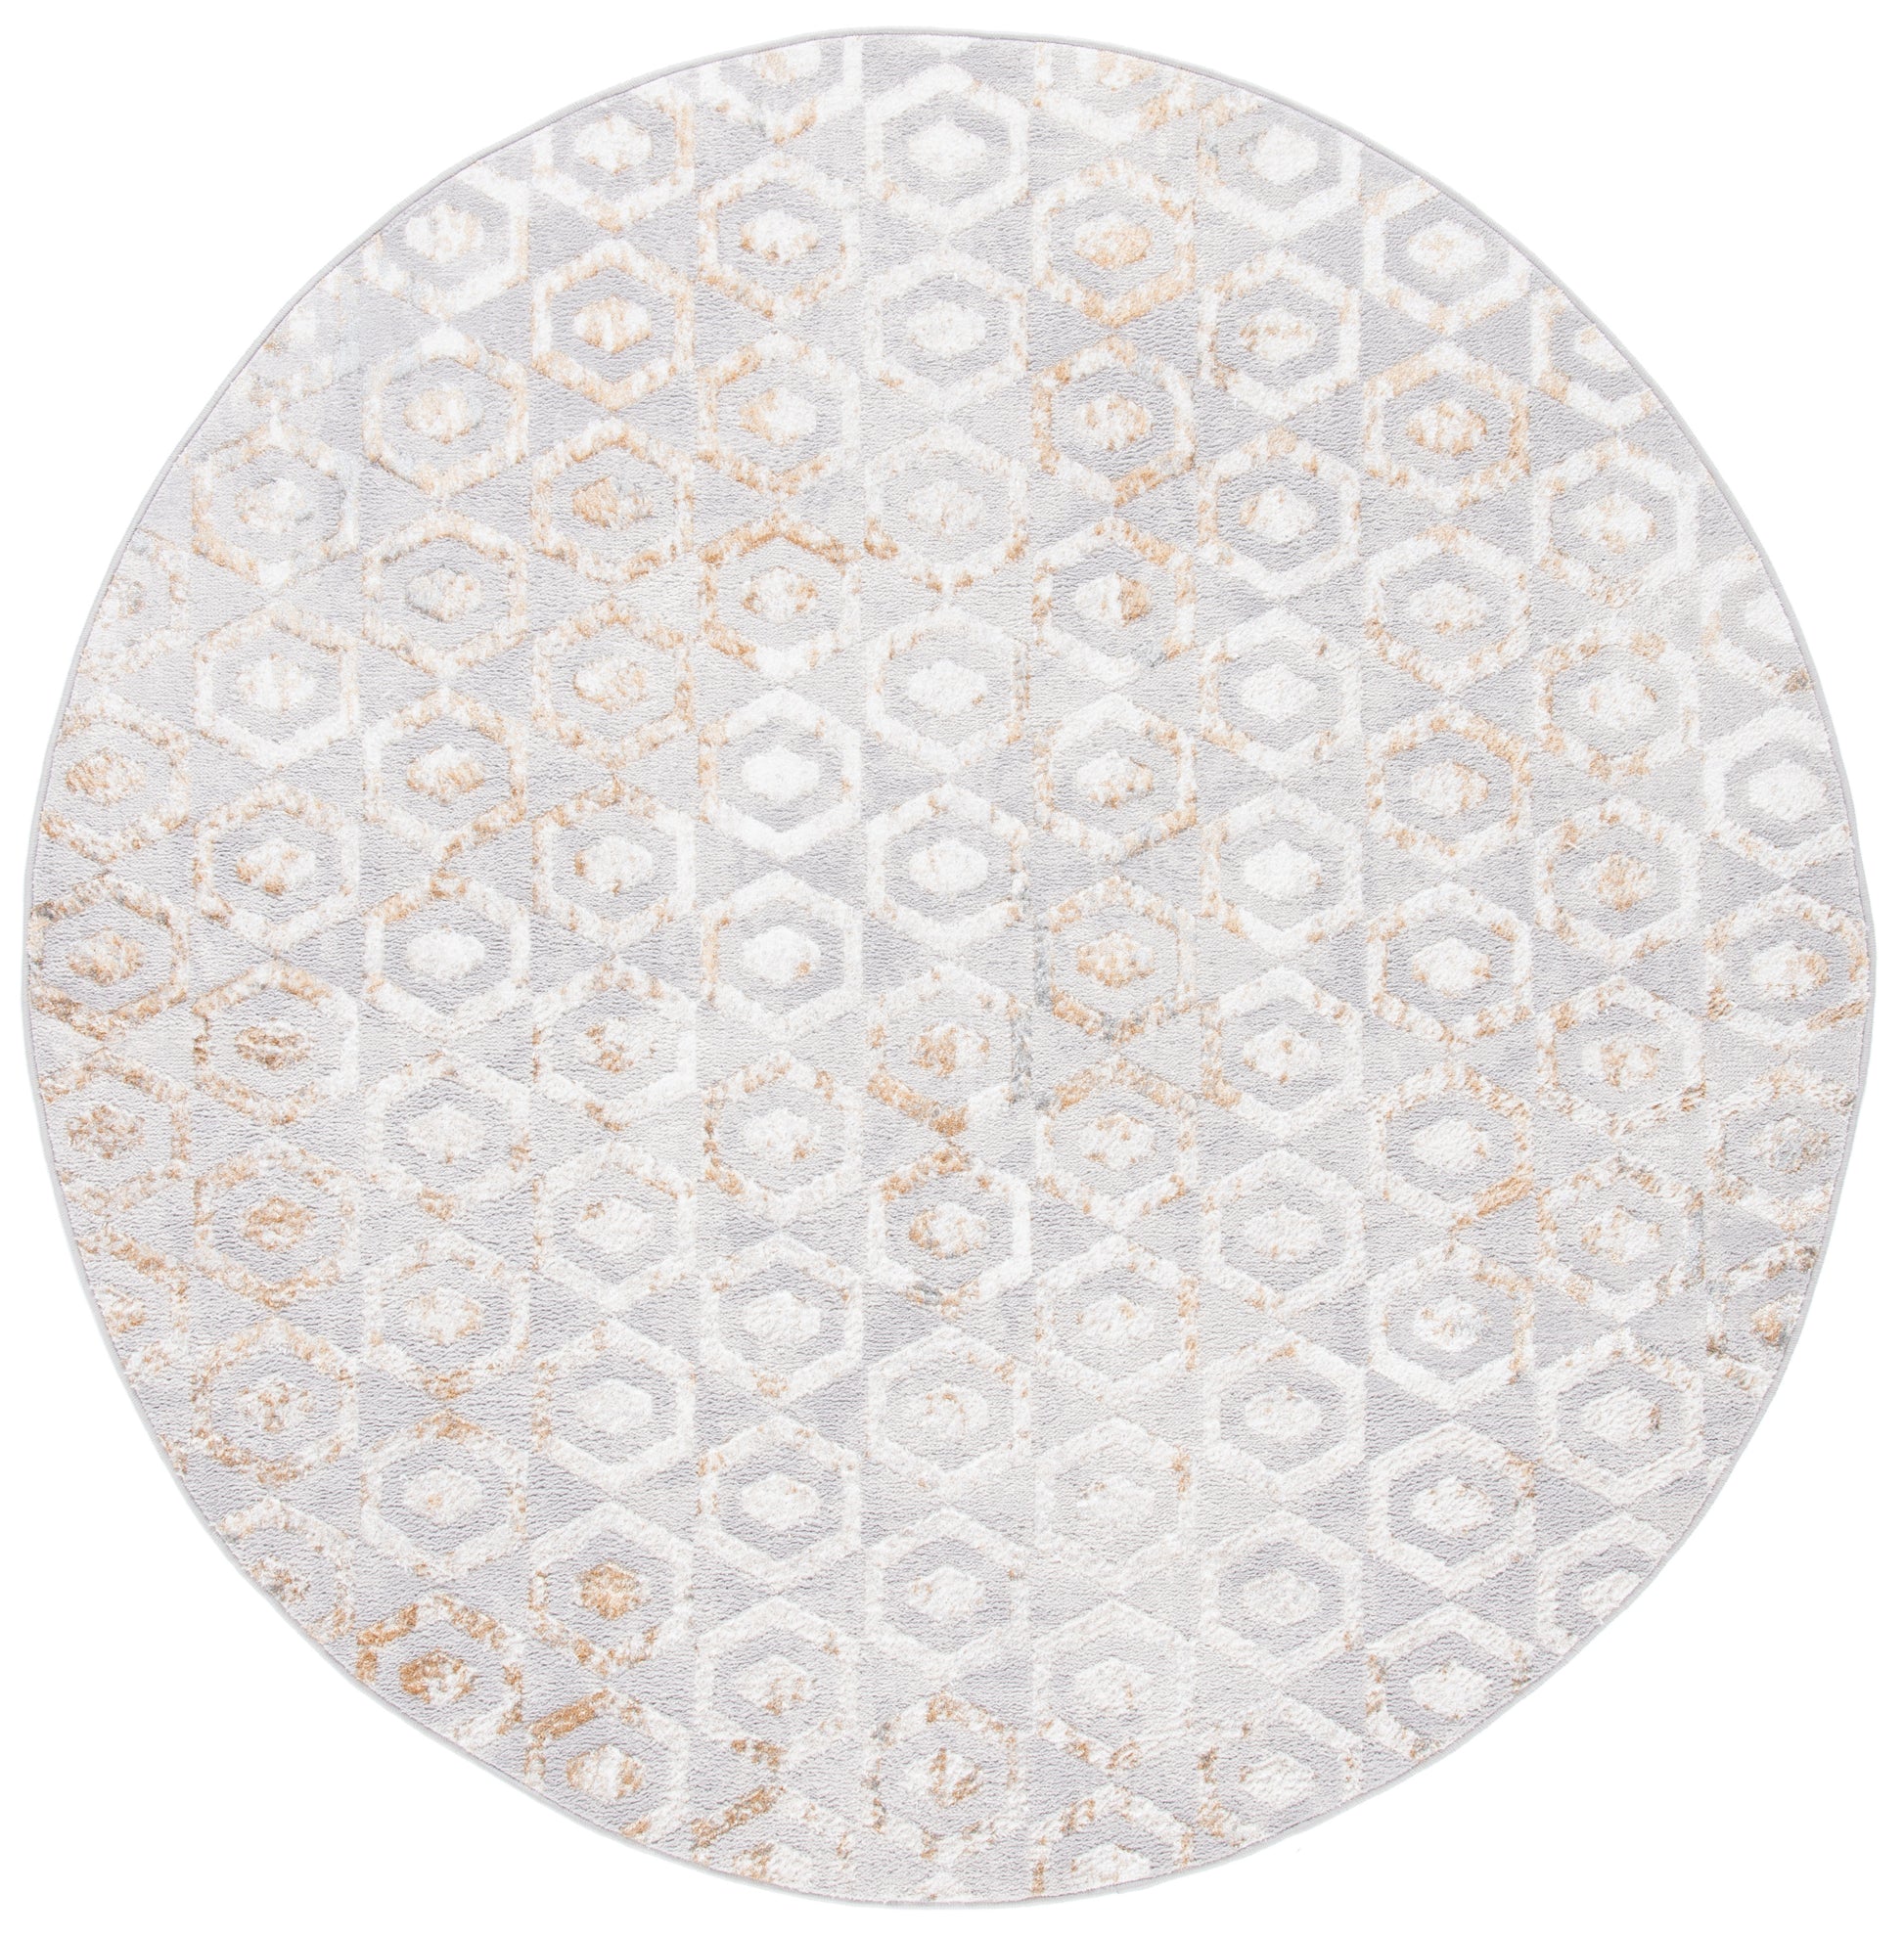 Safavieh Orchard Orc608F Grey/Gold Area Rug